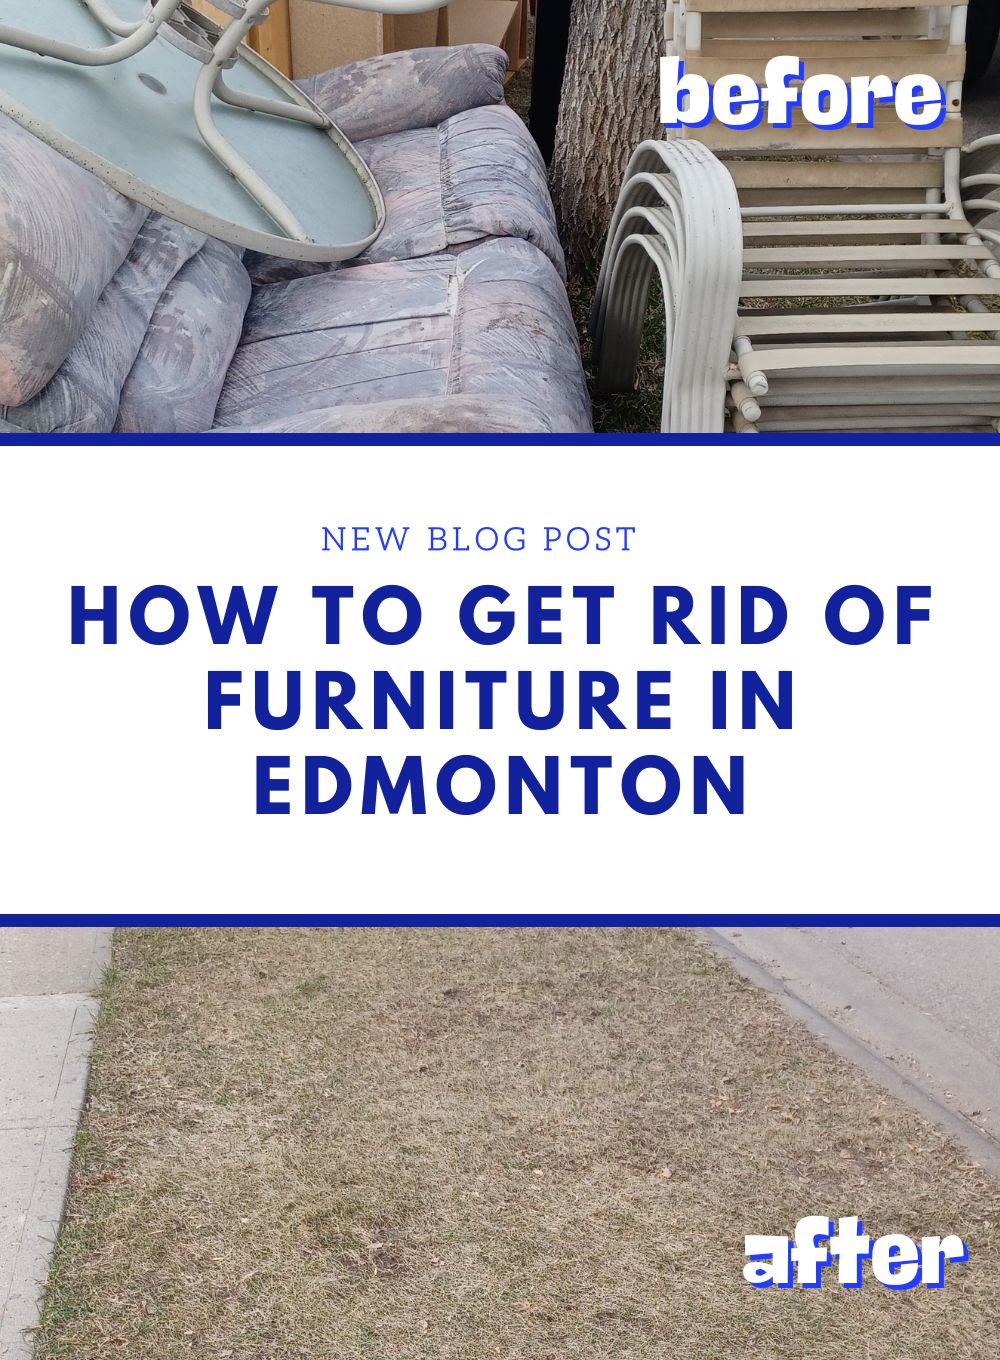 How to Get Rid of Furniture in Edmonton